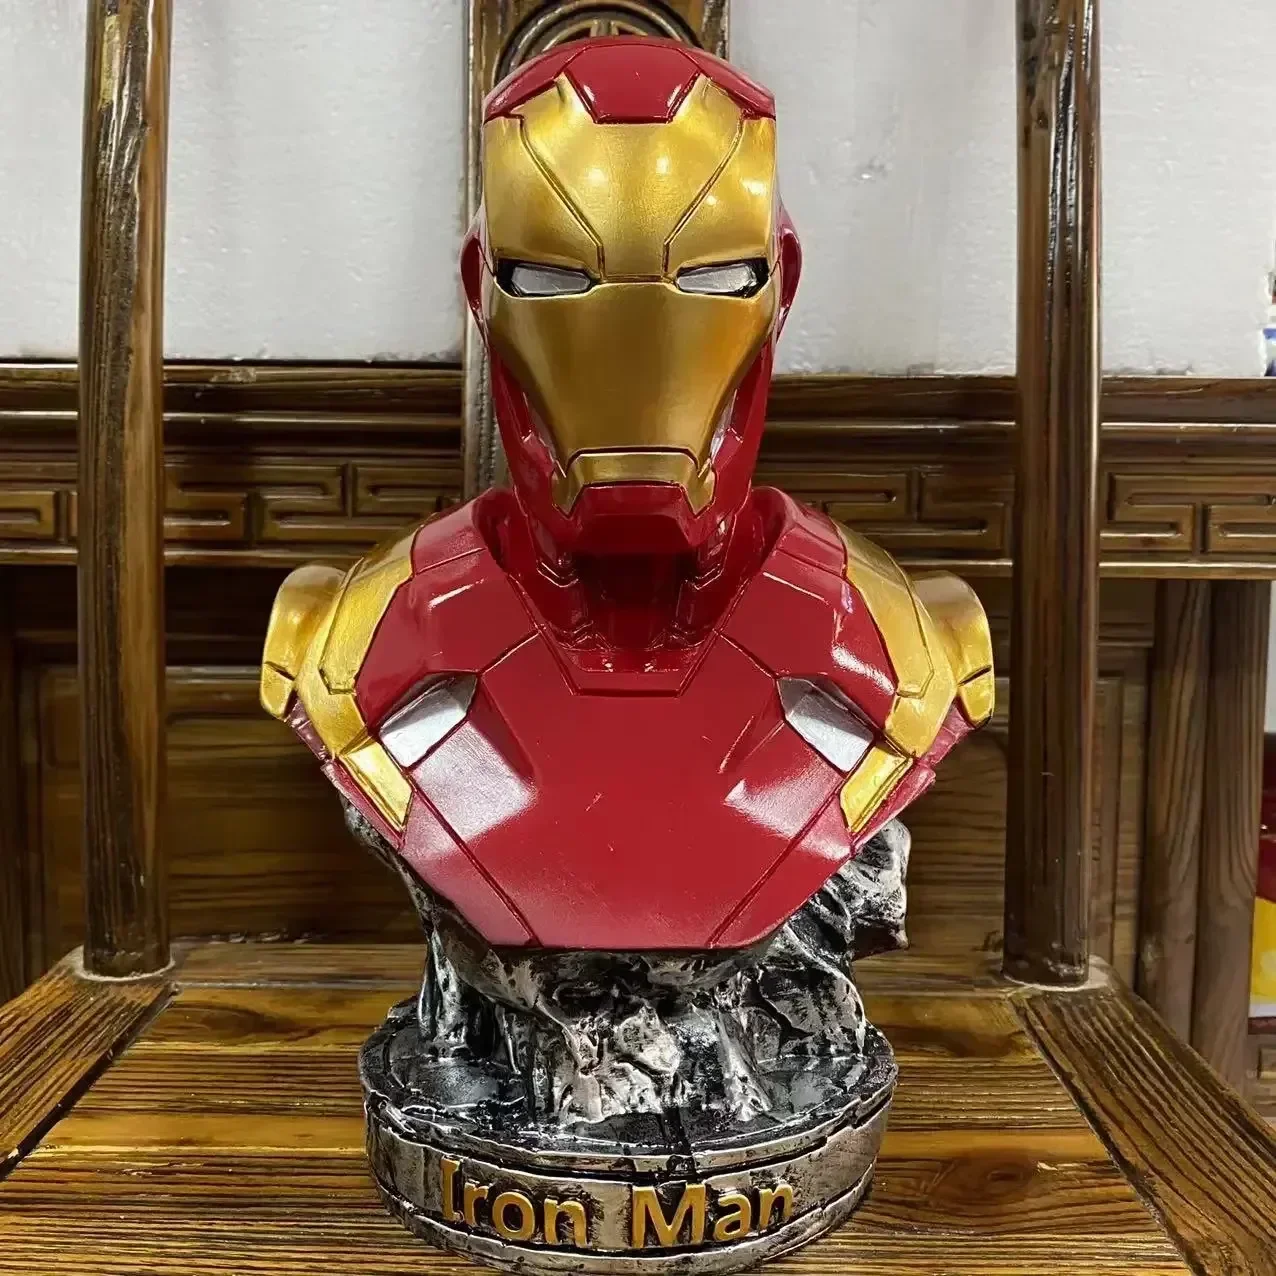 

New Marvel Avengers Iron Man Anime Peripheral Black Panther Bust 1:1 Figure Bust Living Room Ornament Large Resin Gift